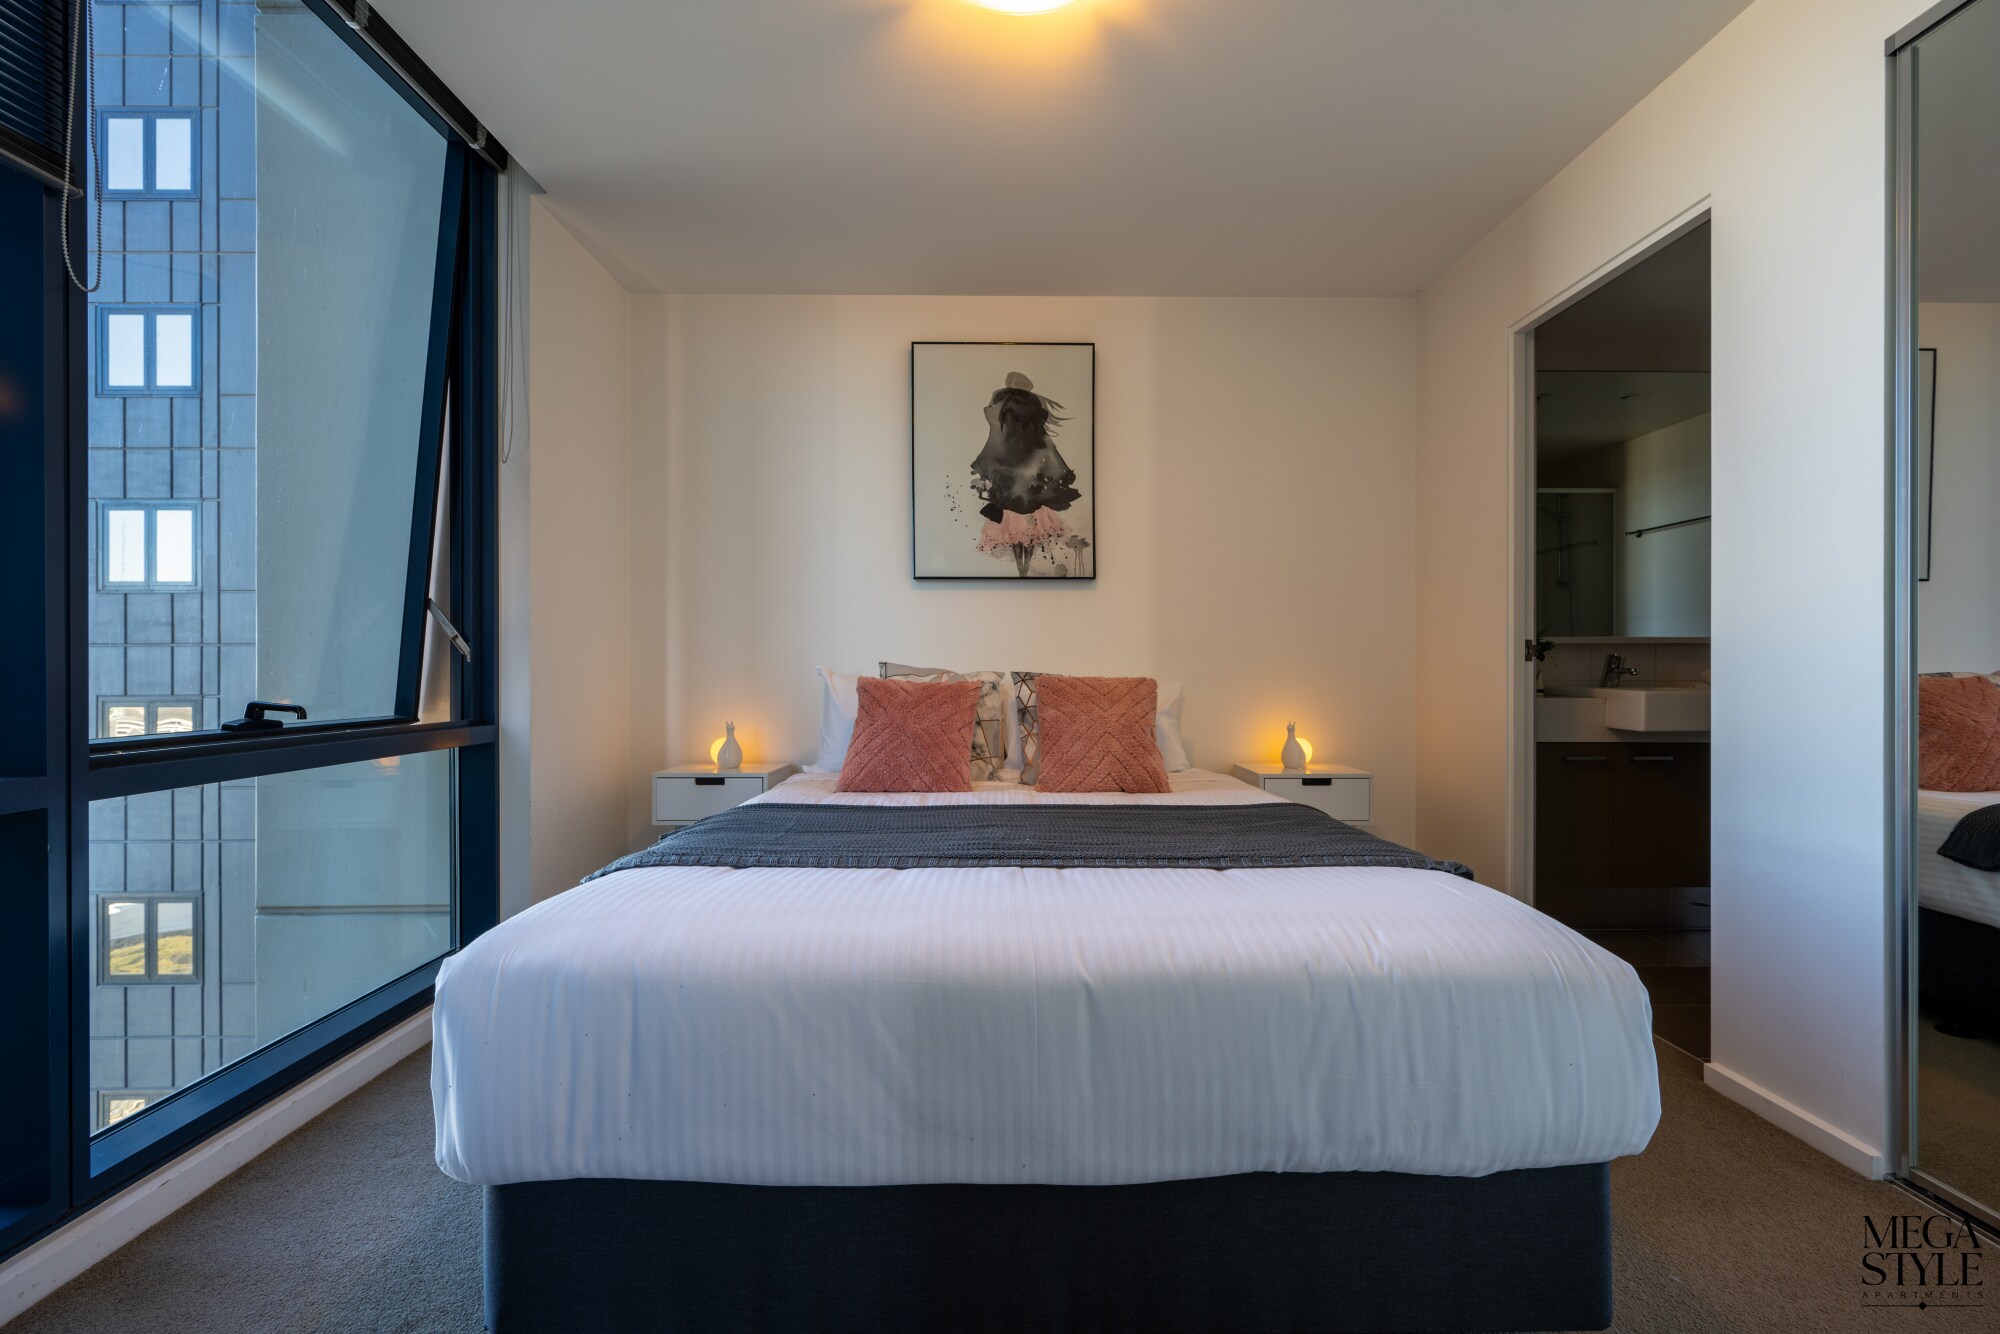 The bedroom also features city views from the floor to ceiling windows